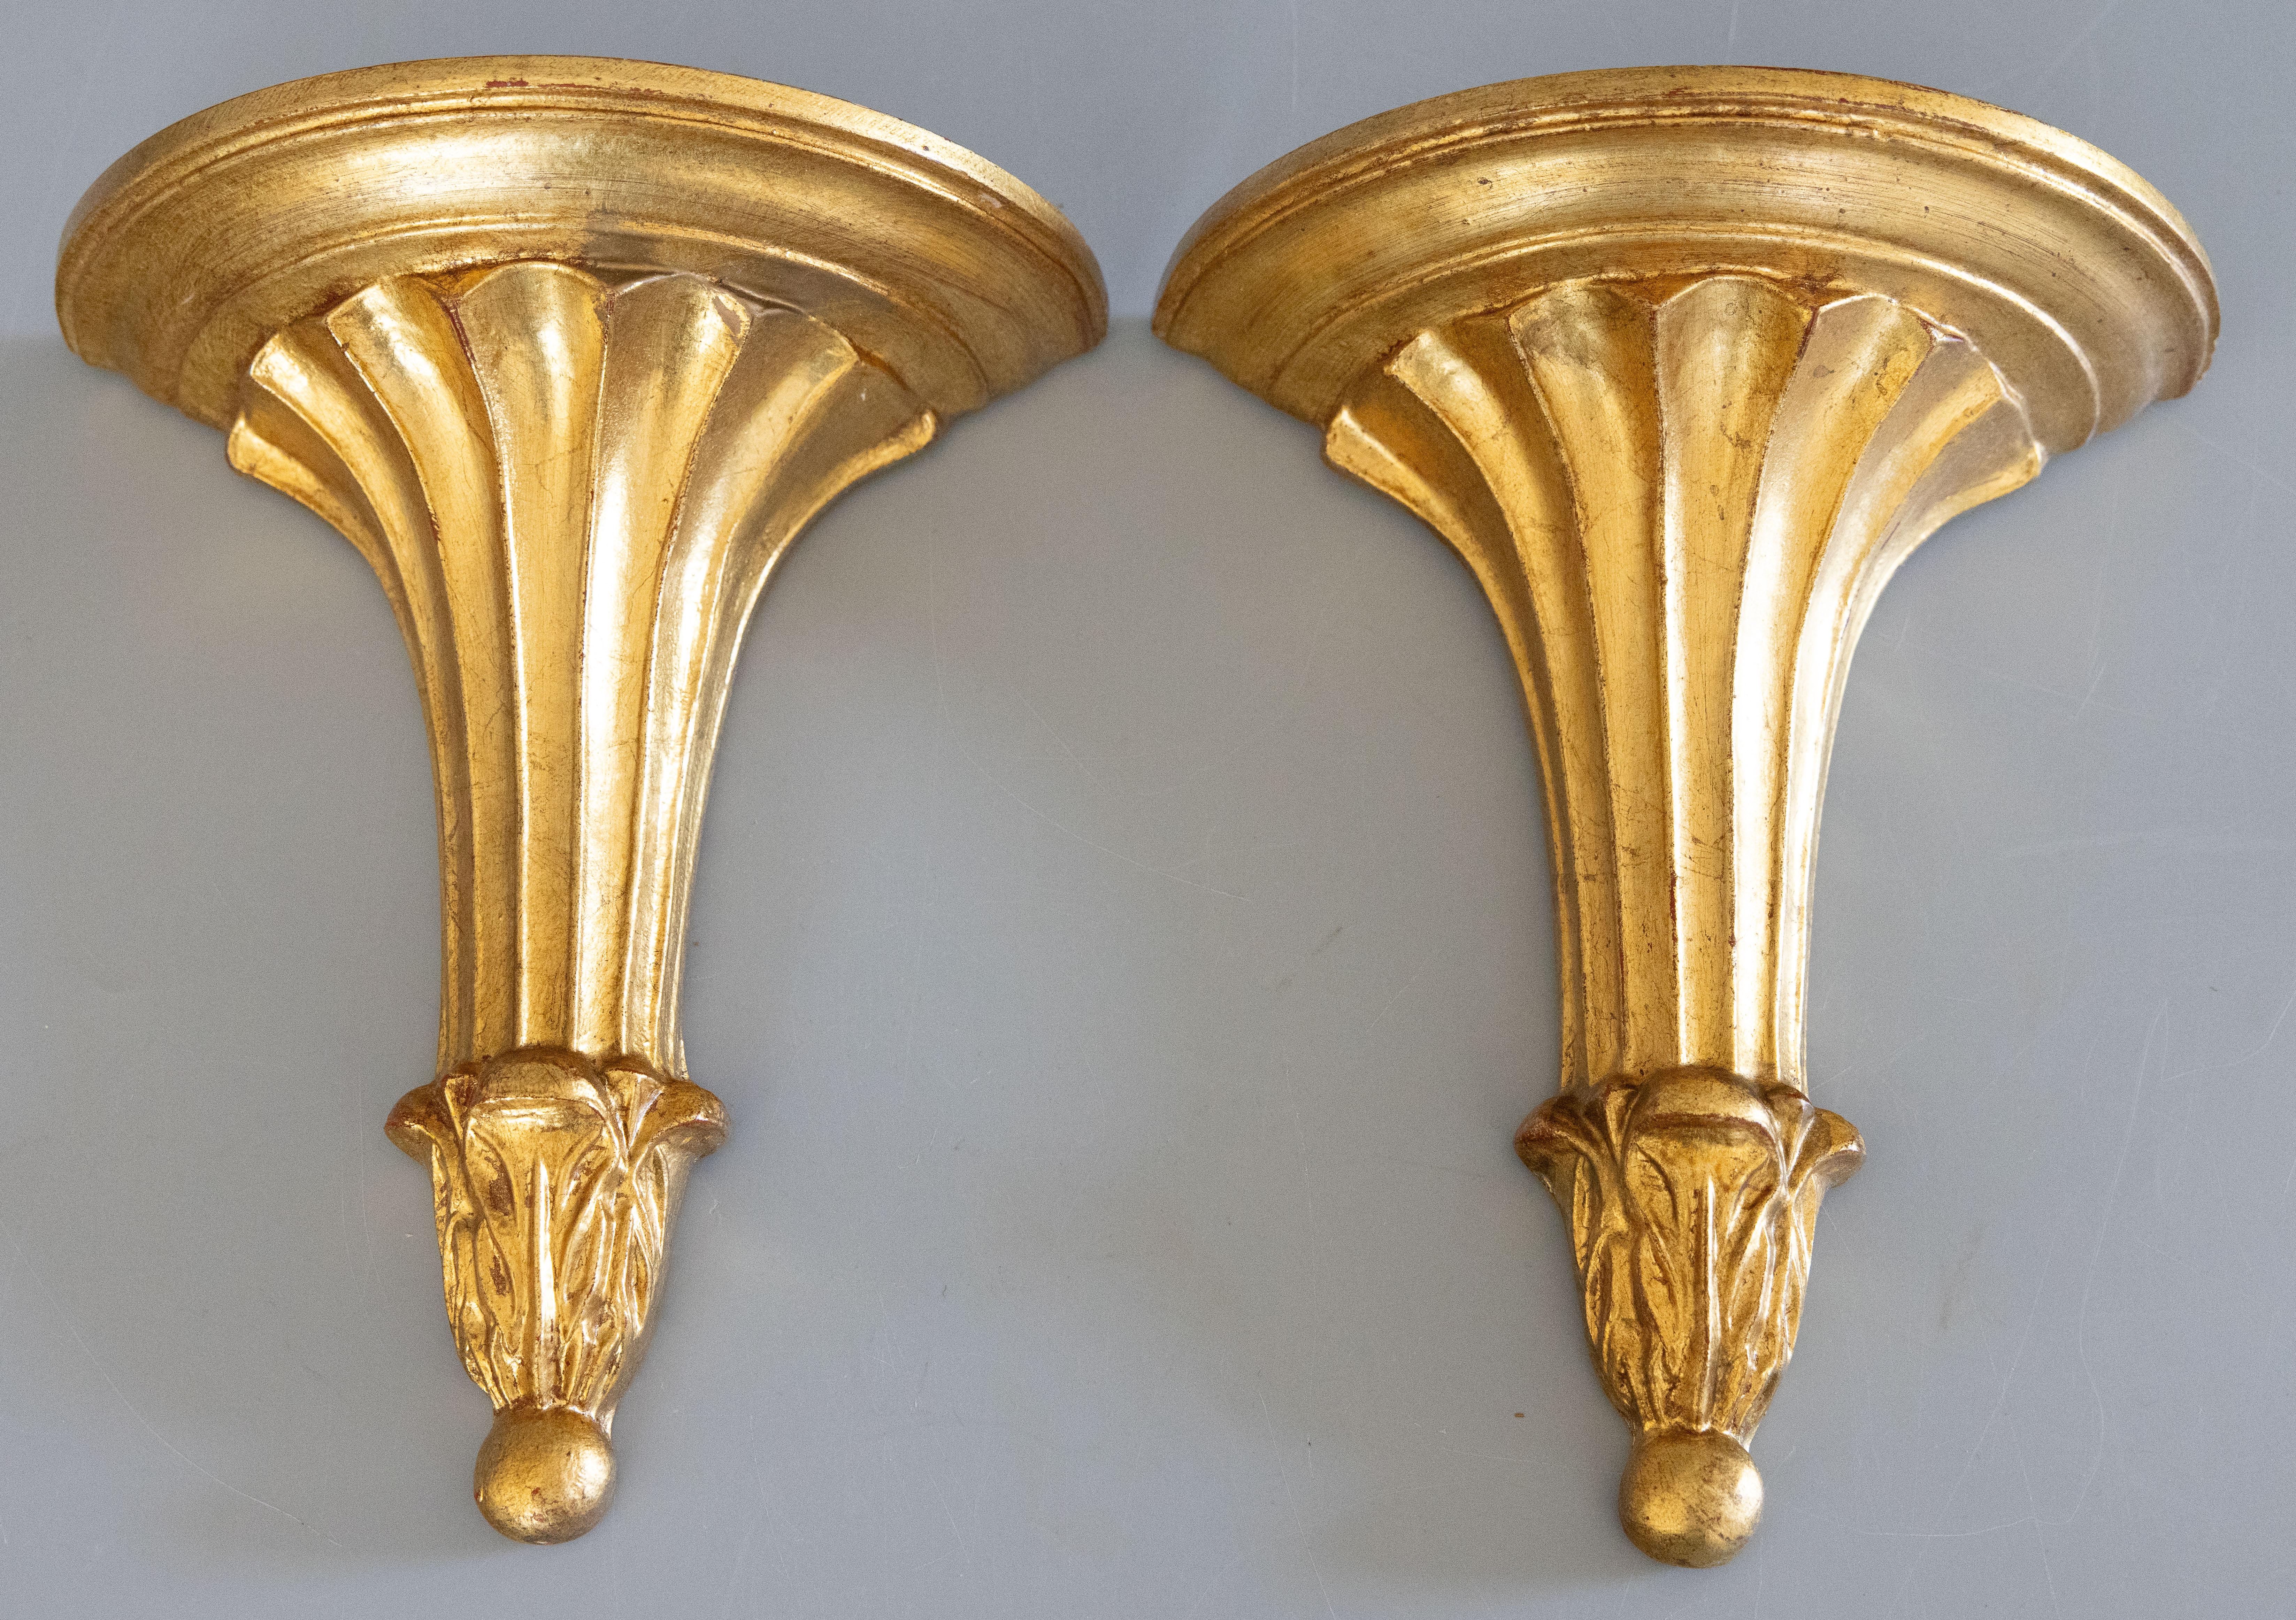 A stunning pair of vintage Mid-Century Neoclassical style Italian Florentine gilded wood wall brackets or shelves. These gorgeous brackets have a stylish fluted design with a lovely gilt patina. They are perfect for displaying decorative